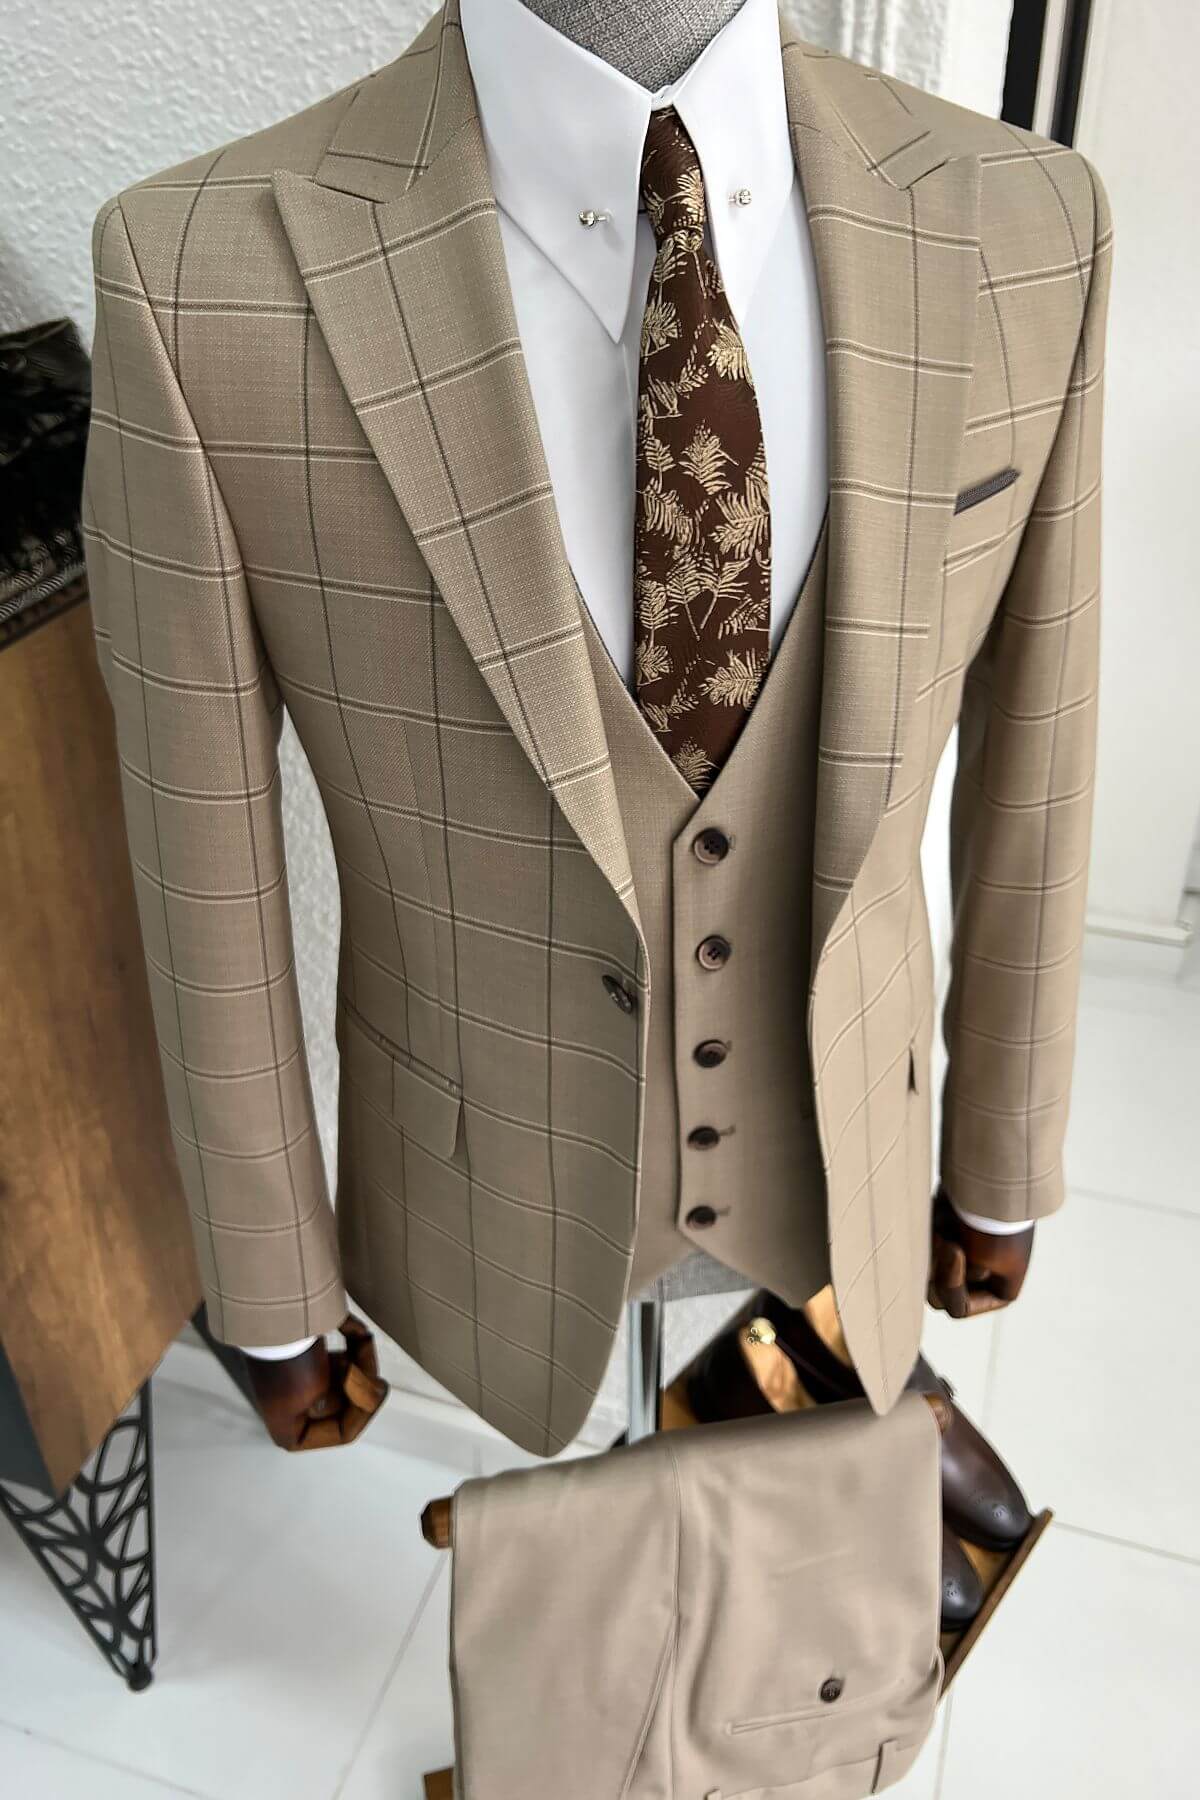 A Patterned Beige Wool Suit on display